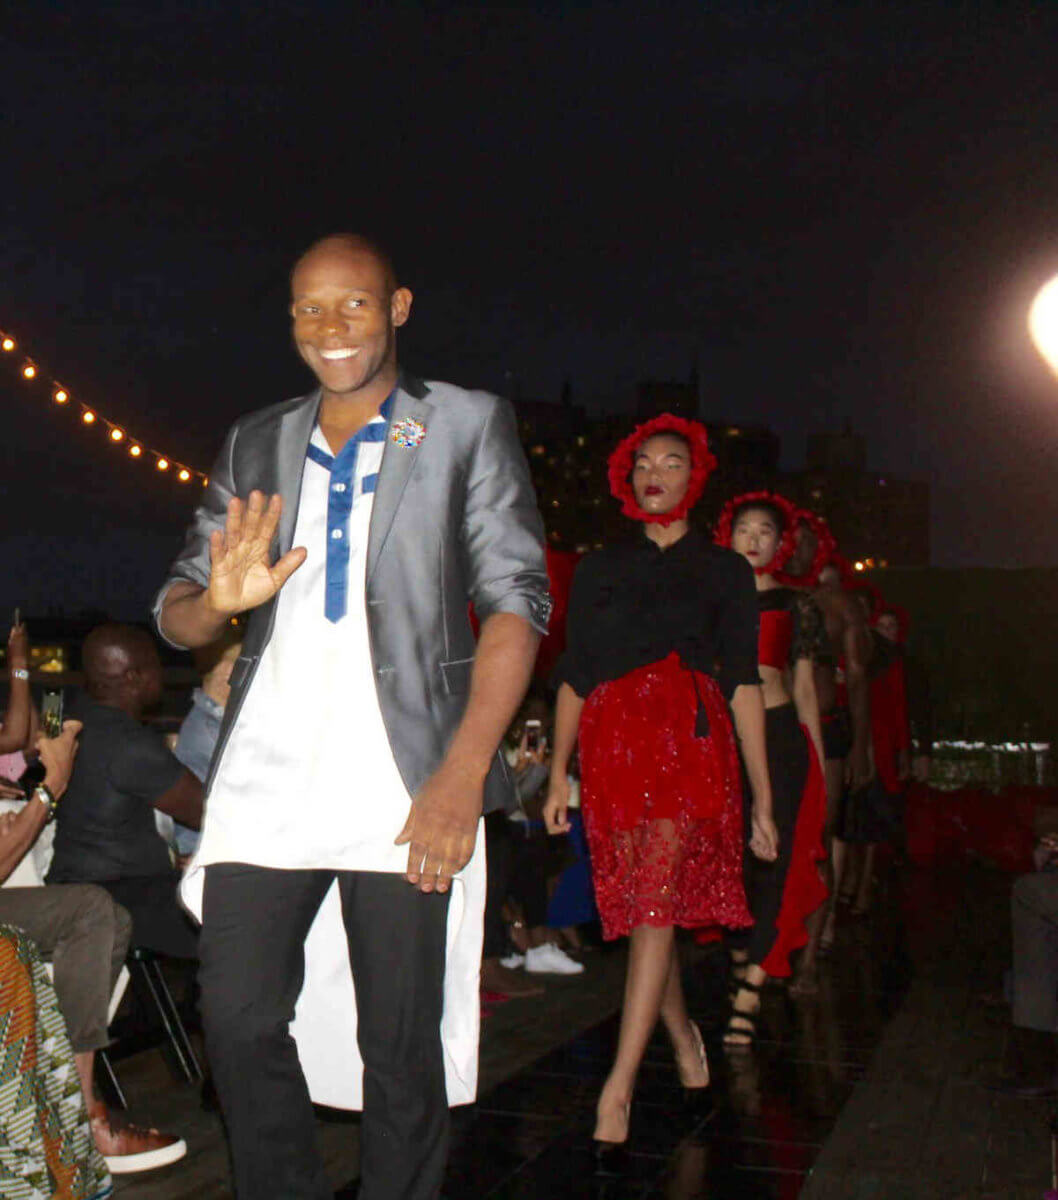 House of D’Marsh couture Spring 2020 collection wows at Brooklyn Commons show